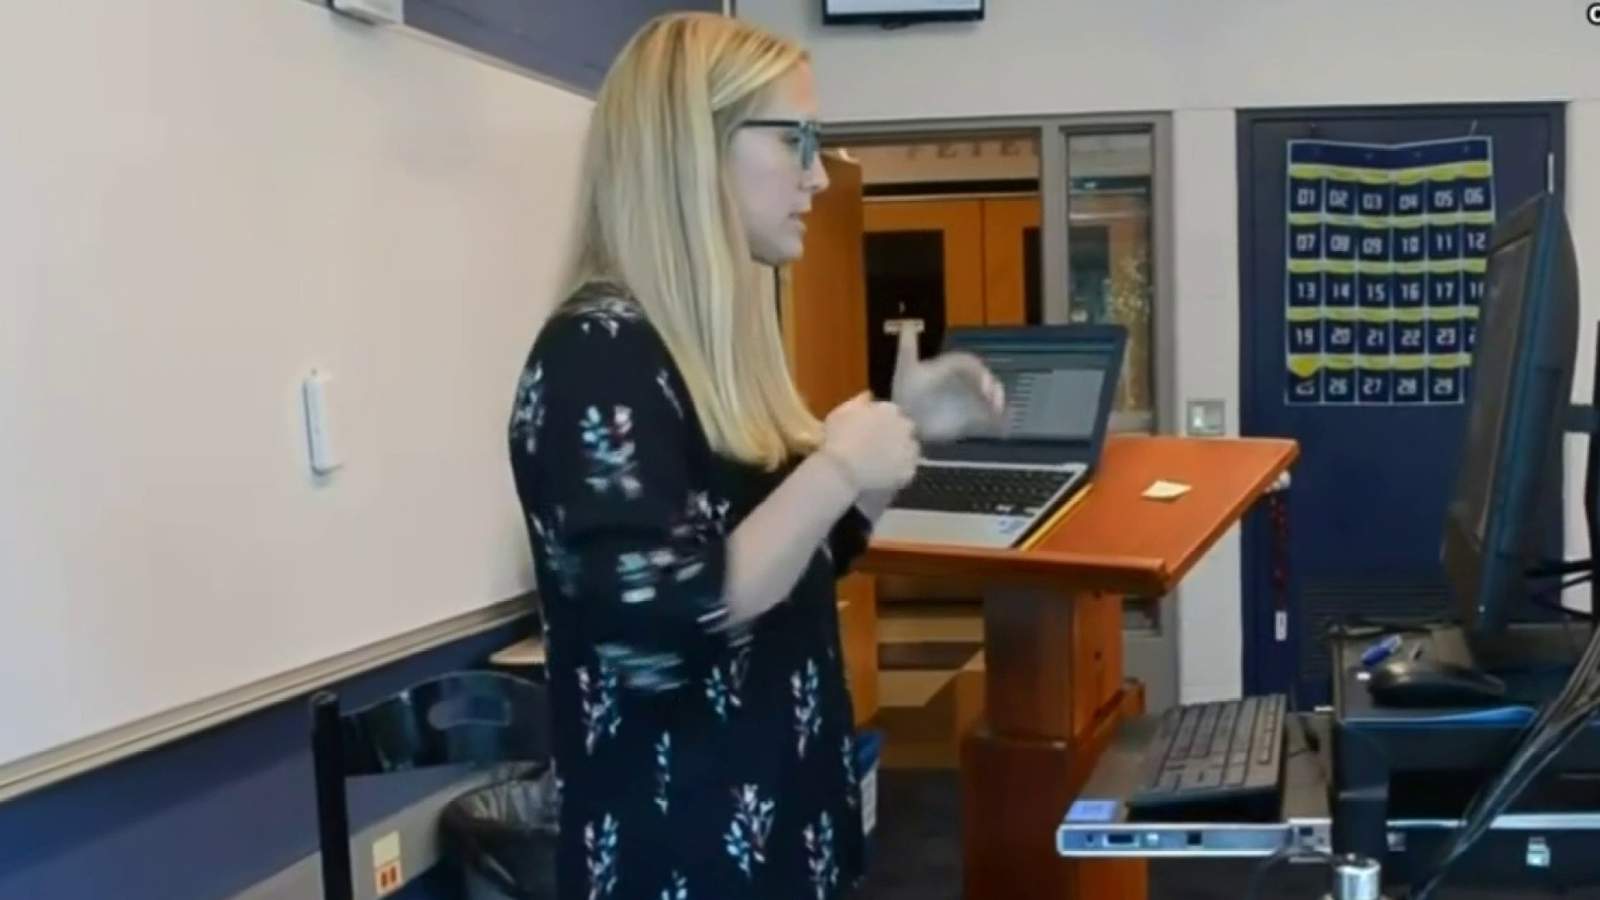 Berkley teacher shares perspective on remote learning